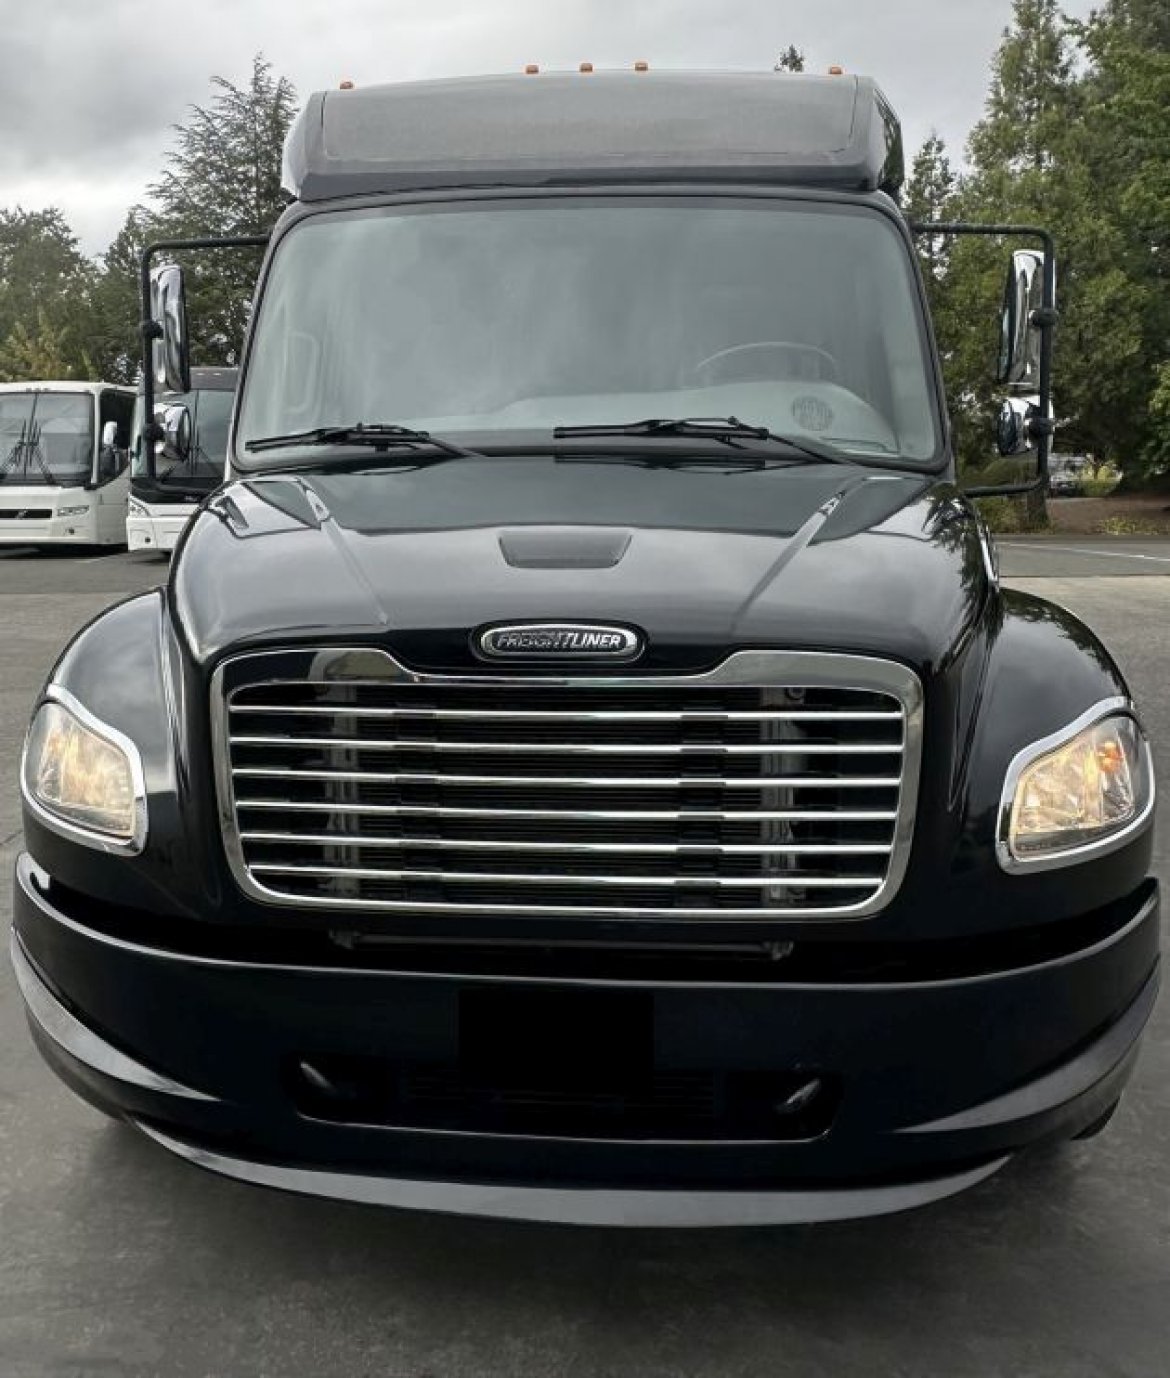 Executive Shuttle for sale: 2015 Freightliner M3 41-45-49 Passenger Executive Shuttle by Grech